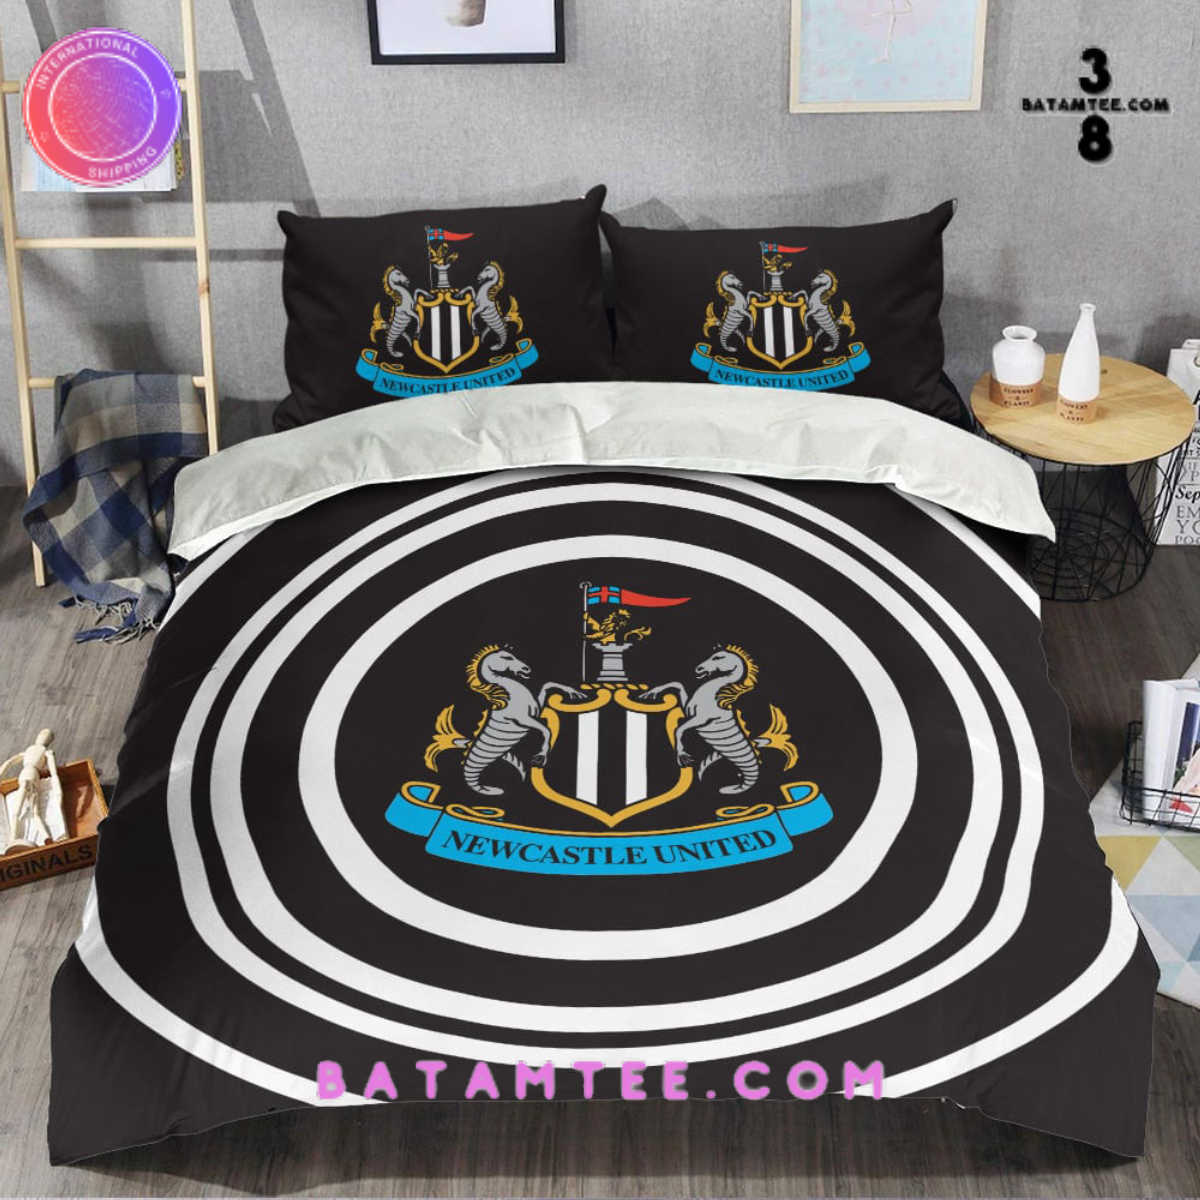 Bedding Set collection for Newcastle United FC fans-Limited Edition's Overview - Batamtee Shop - Threads & Totes: Your Style Destination